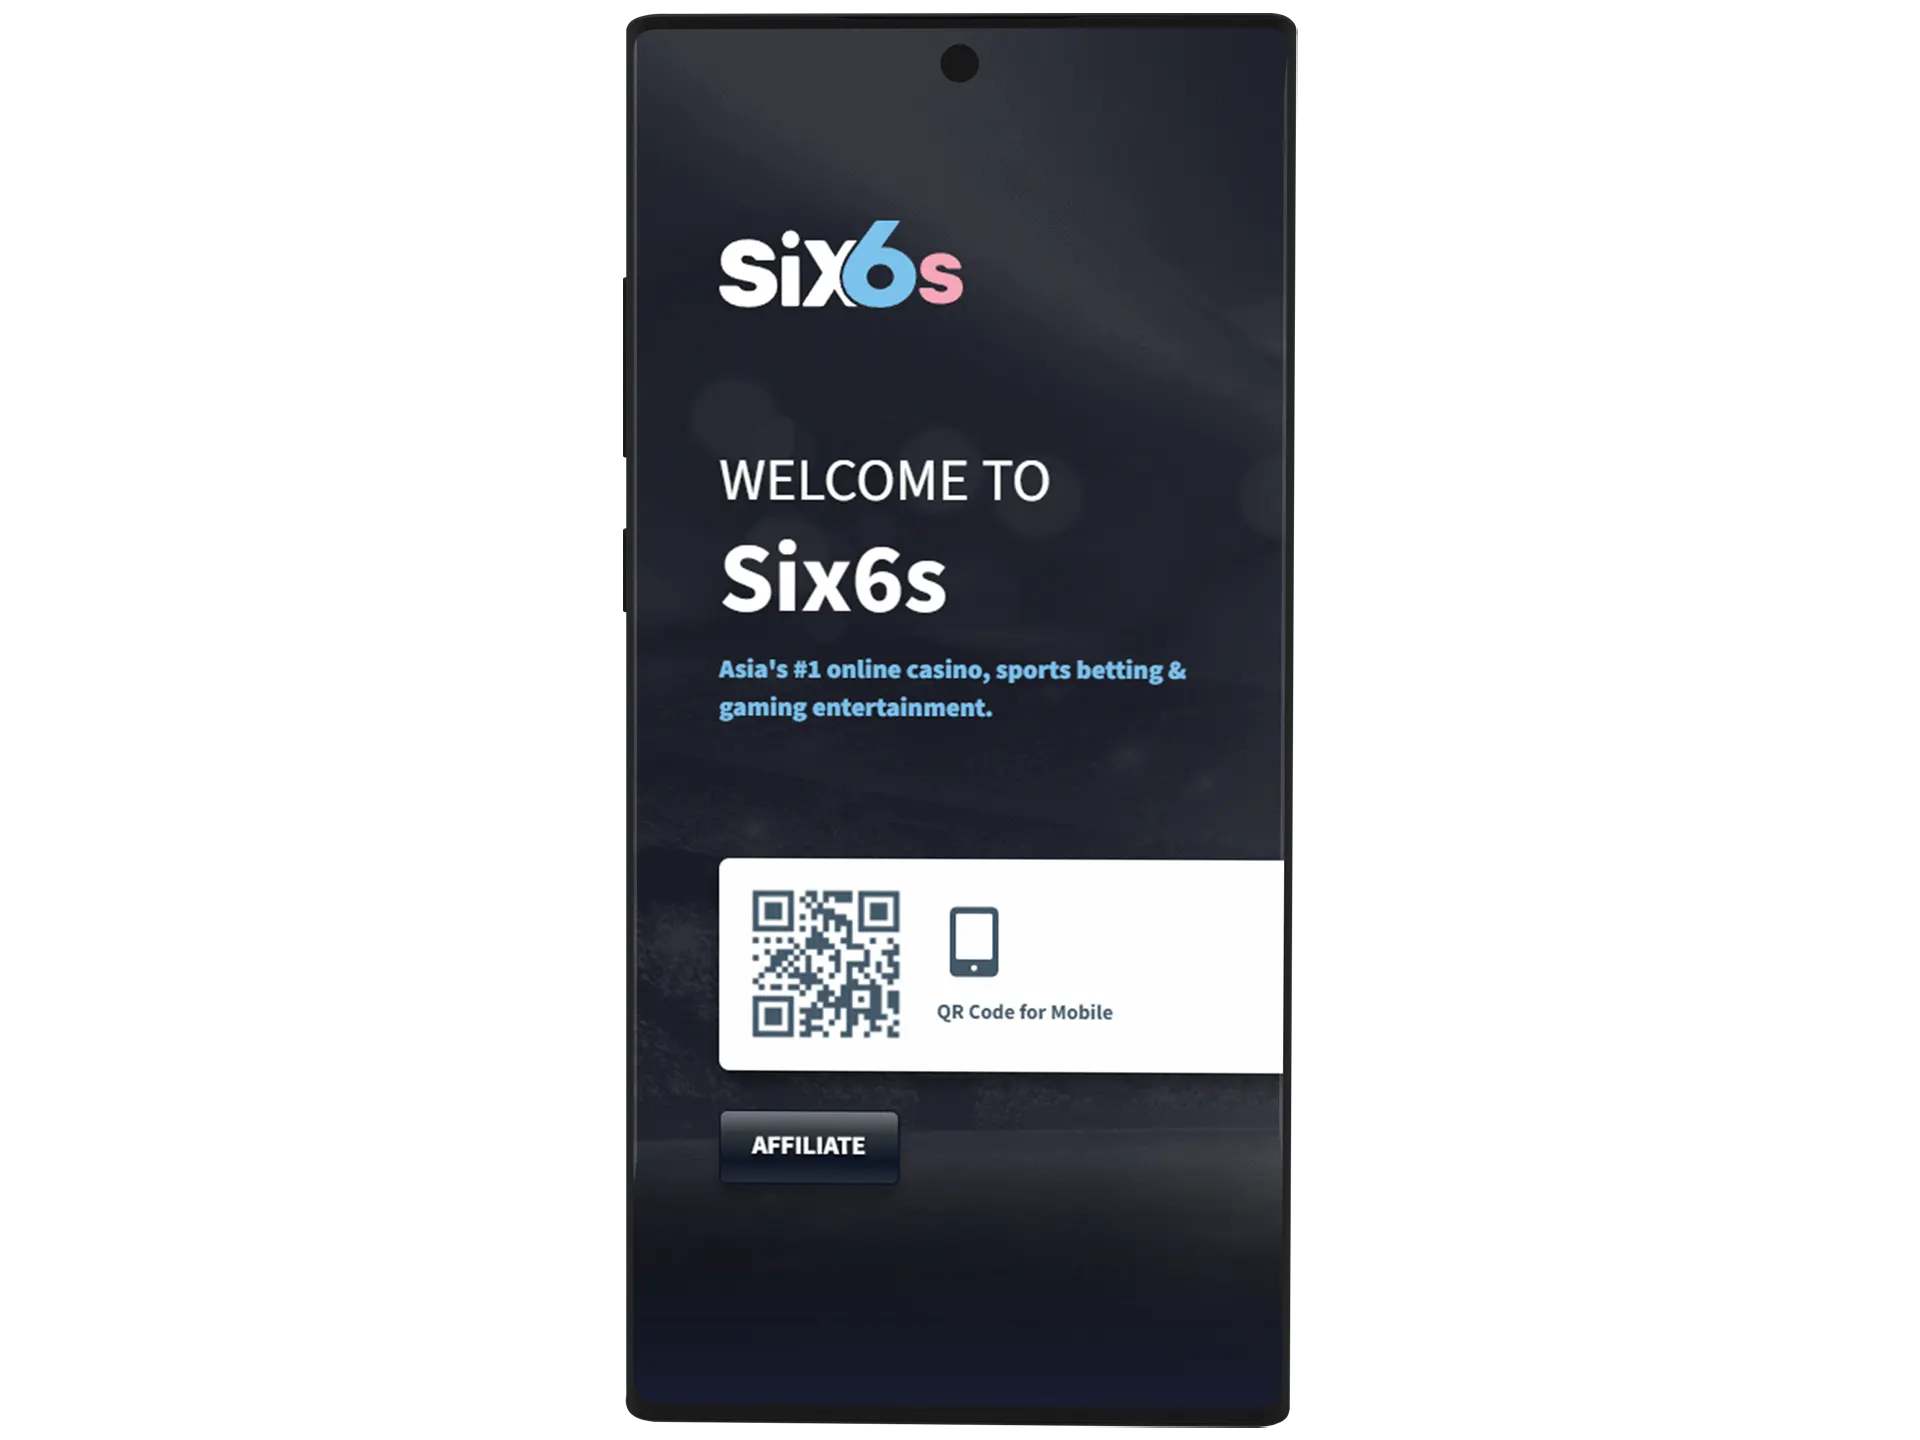 Go to the official Six6s website and download the app.